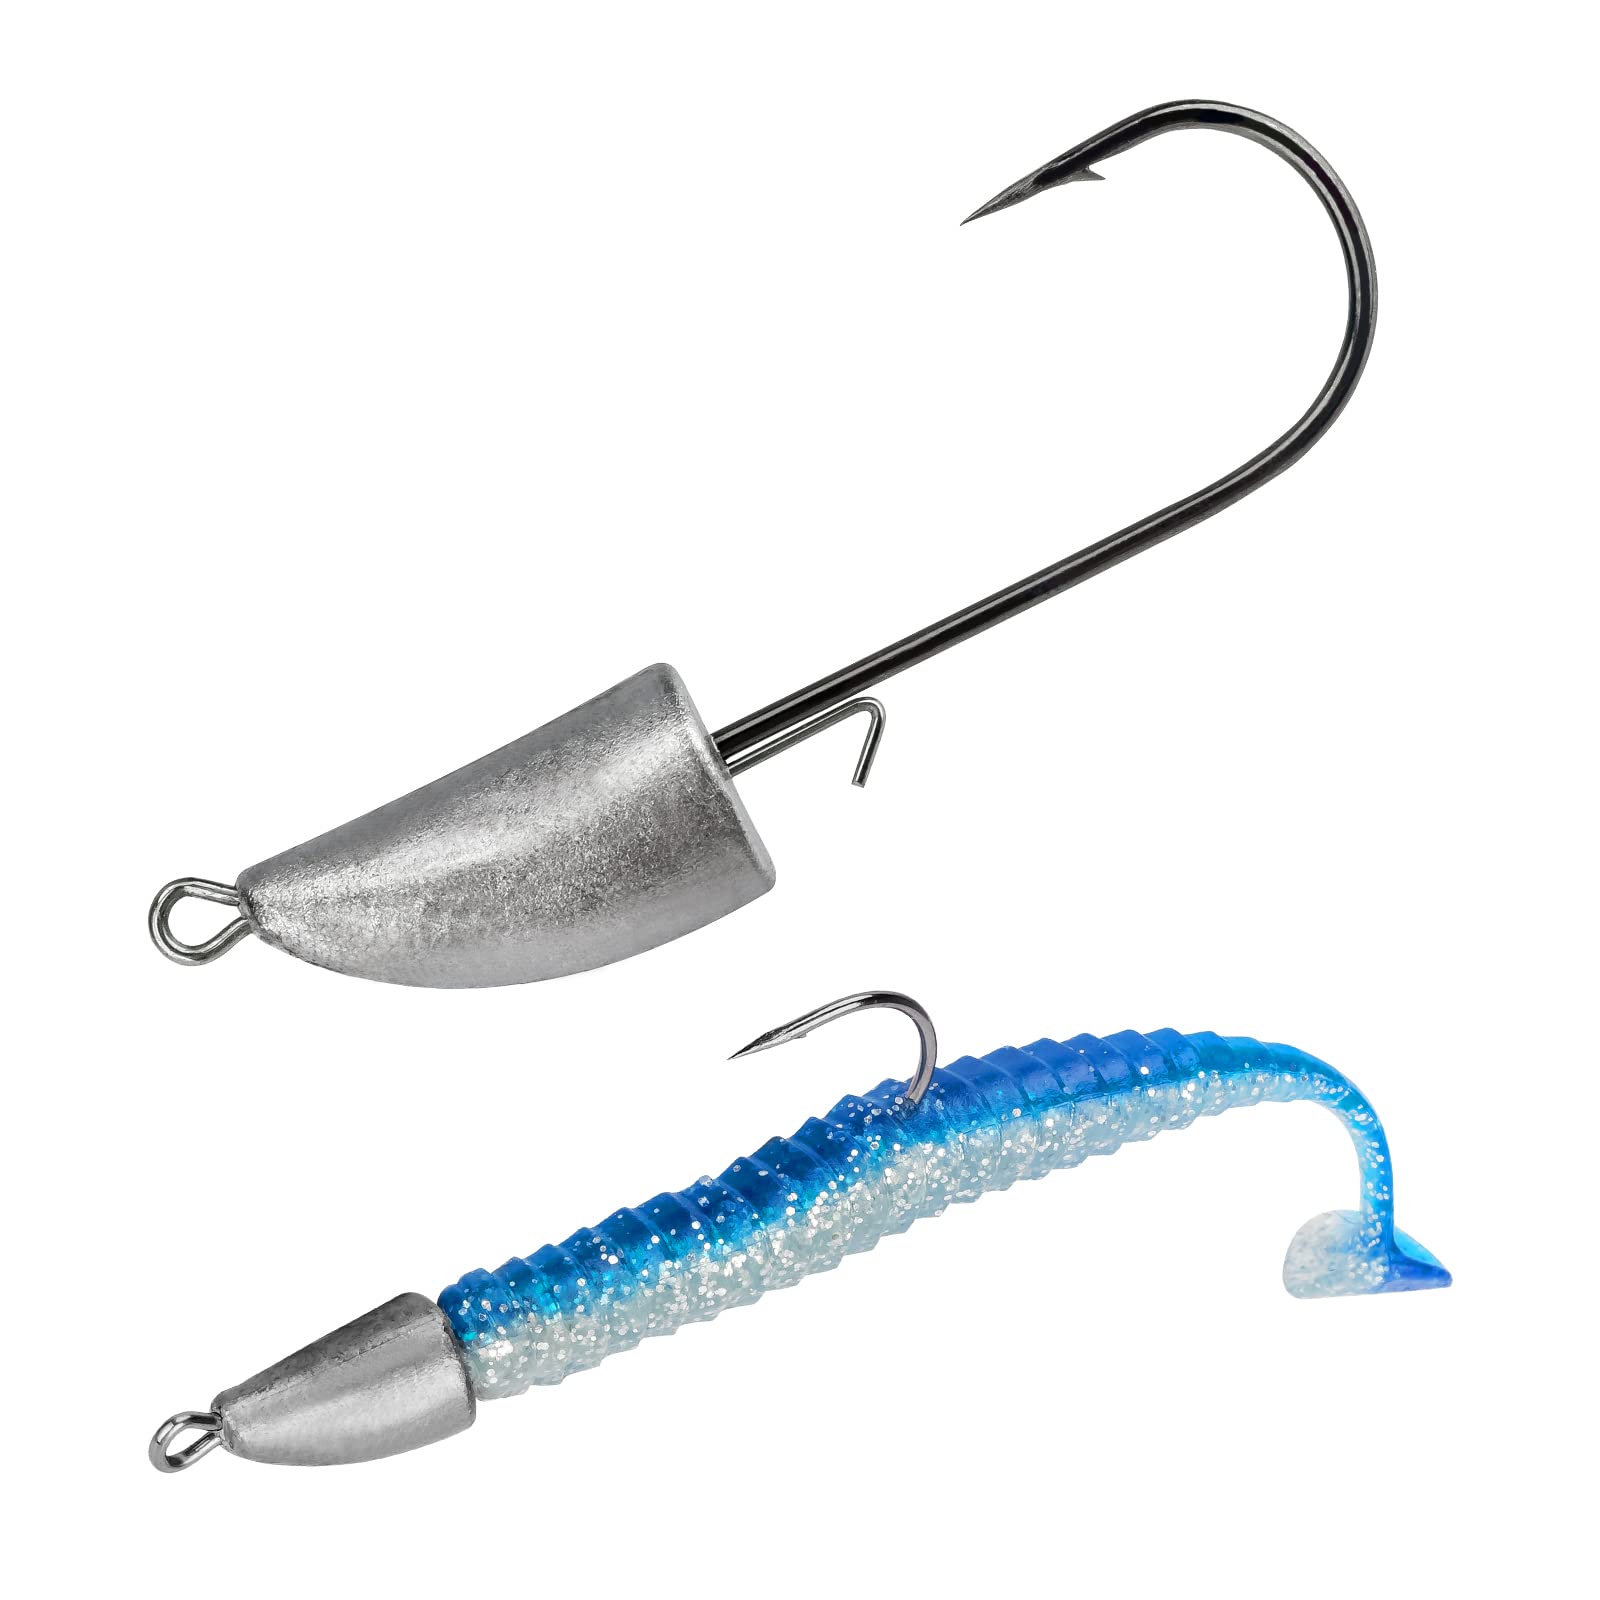 Tiny Fishing Hooks Set With Unpainted Crappie Jig Heads, Worm Hooks, And  Assorted Hooksets For Bass, Flounder, Saltwater, Bass And More Kit 230531  From Bian05, $9.41